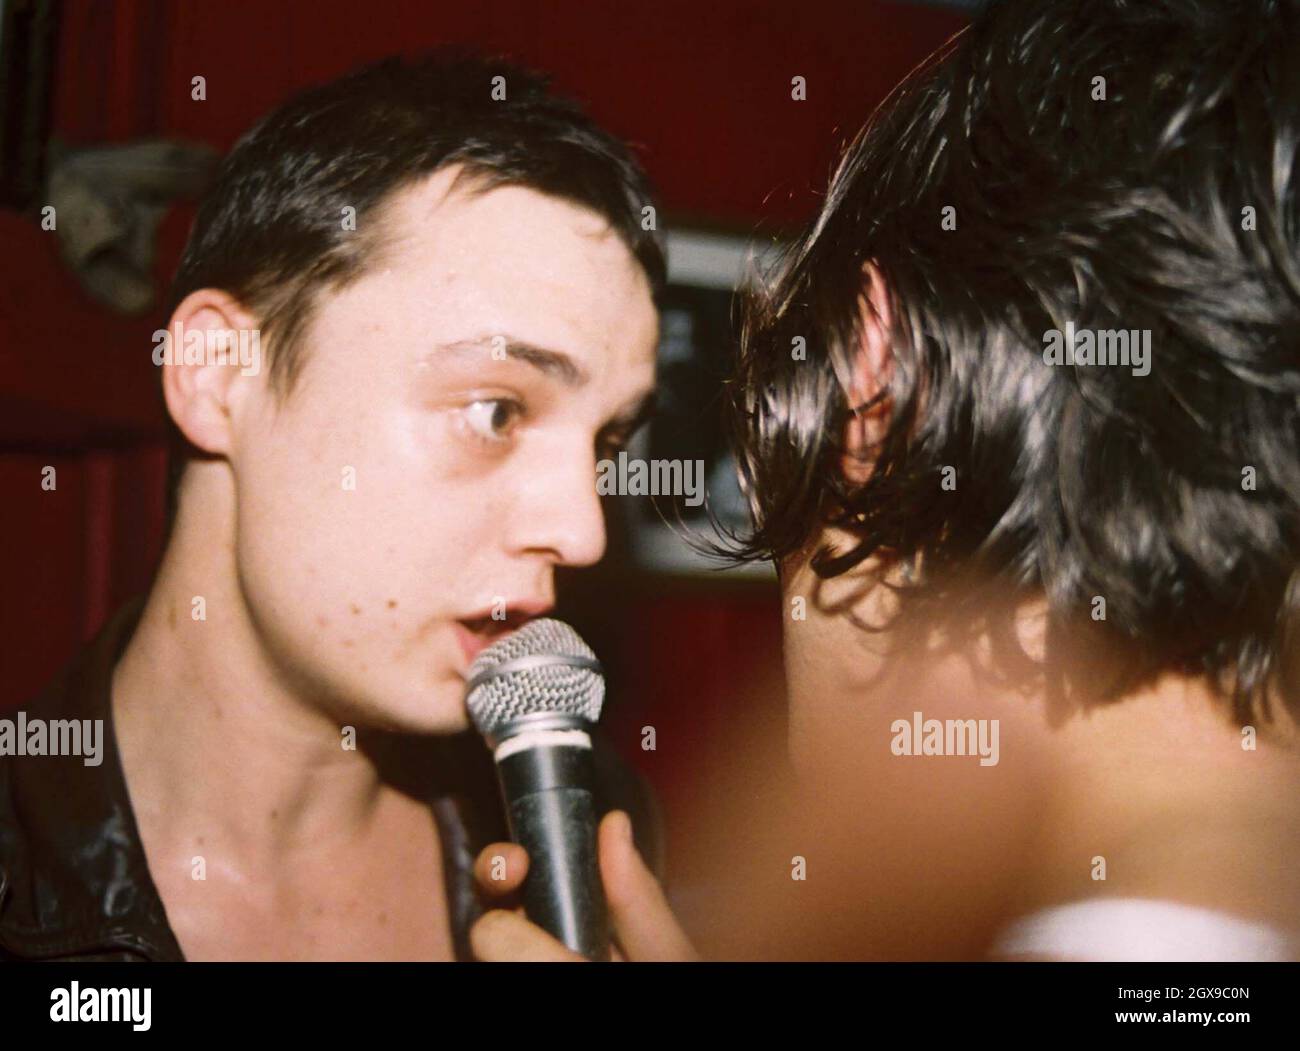 The Libertines, reunited with singer Pete Doherty after his recent release from prison, play a surprise gig at The Duke of Clarence pub in Islington, London. Stock Photo